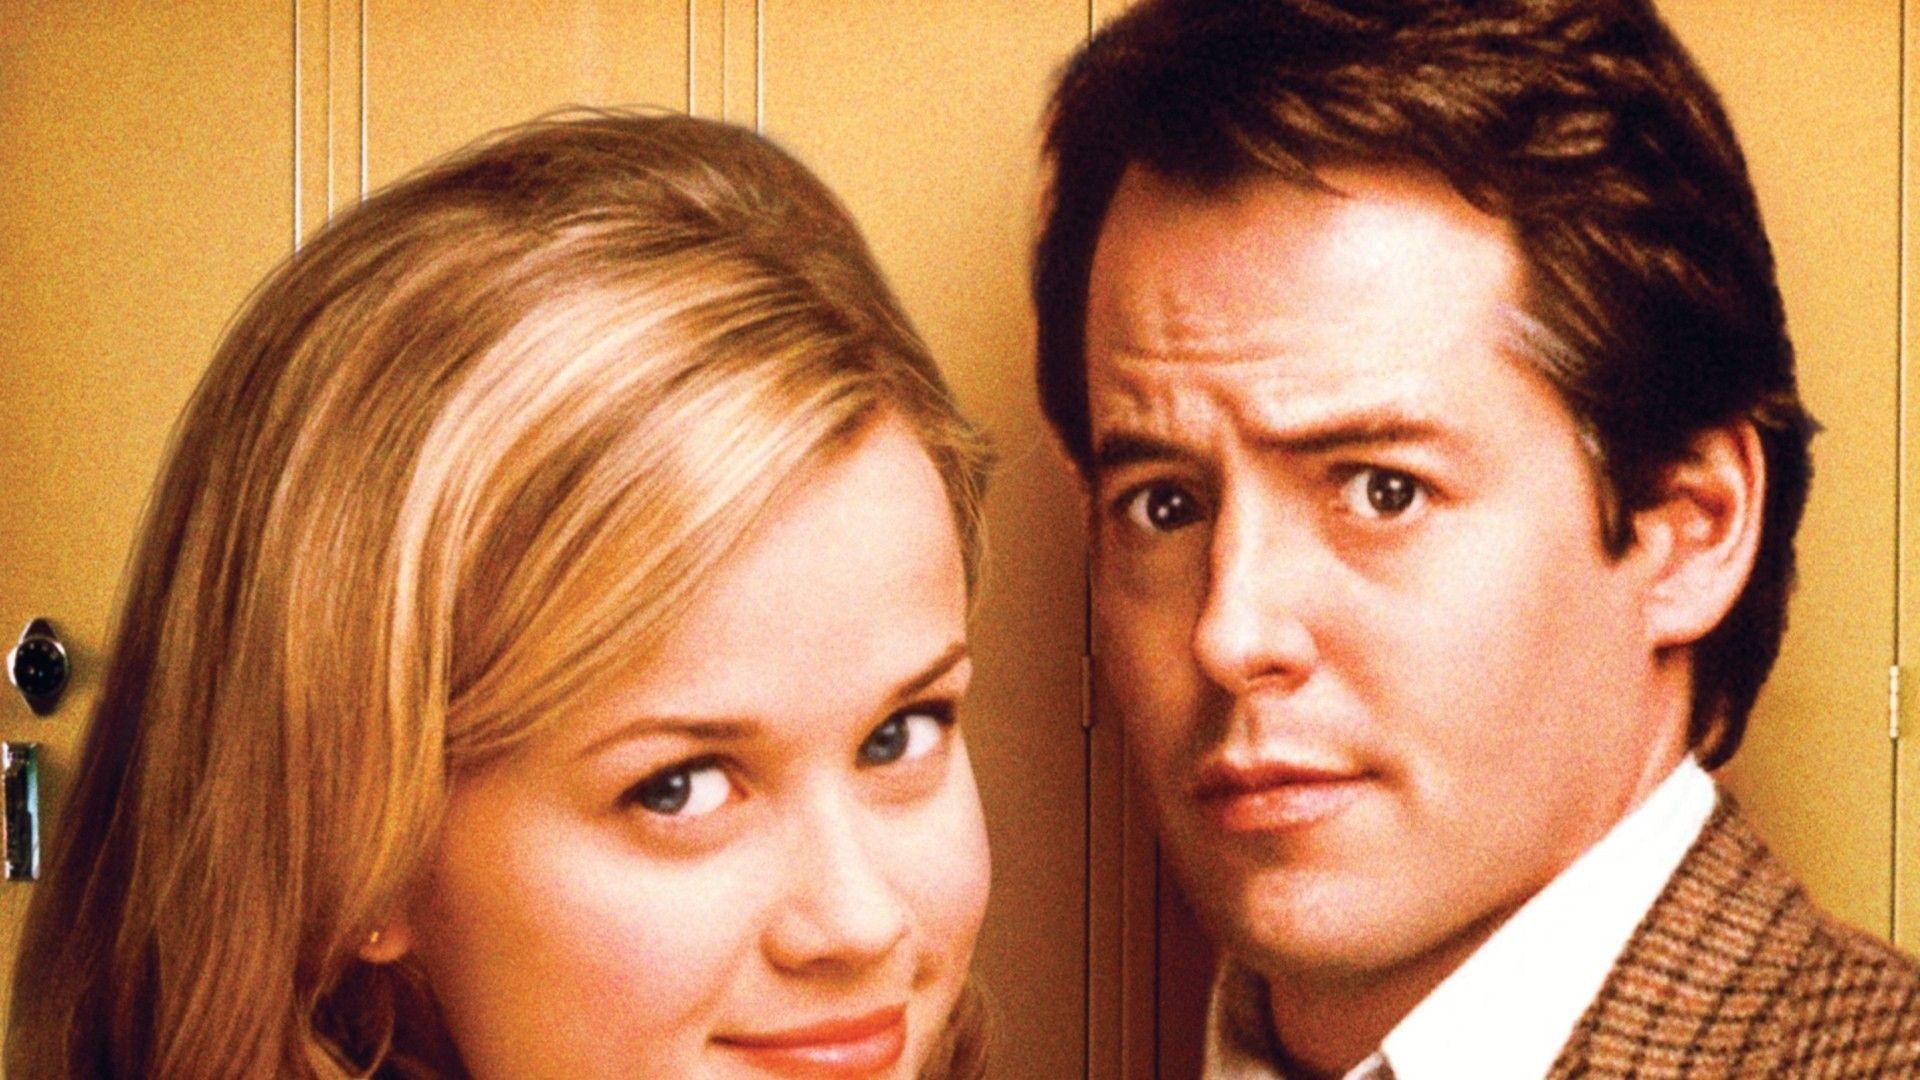 Election **** Matthew Broderick, Reese Witherspoon, Chris